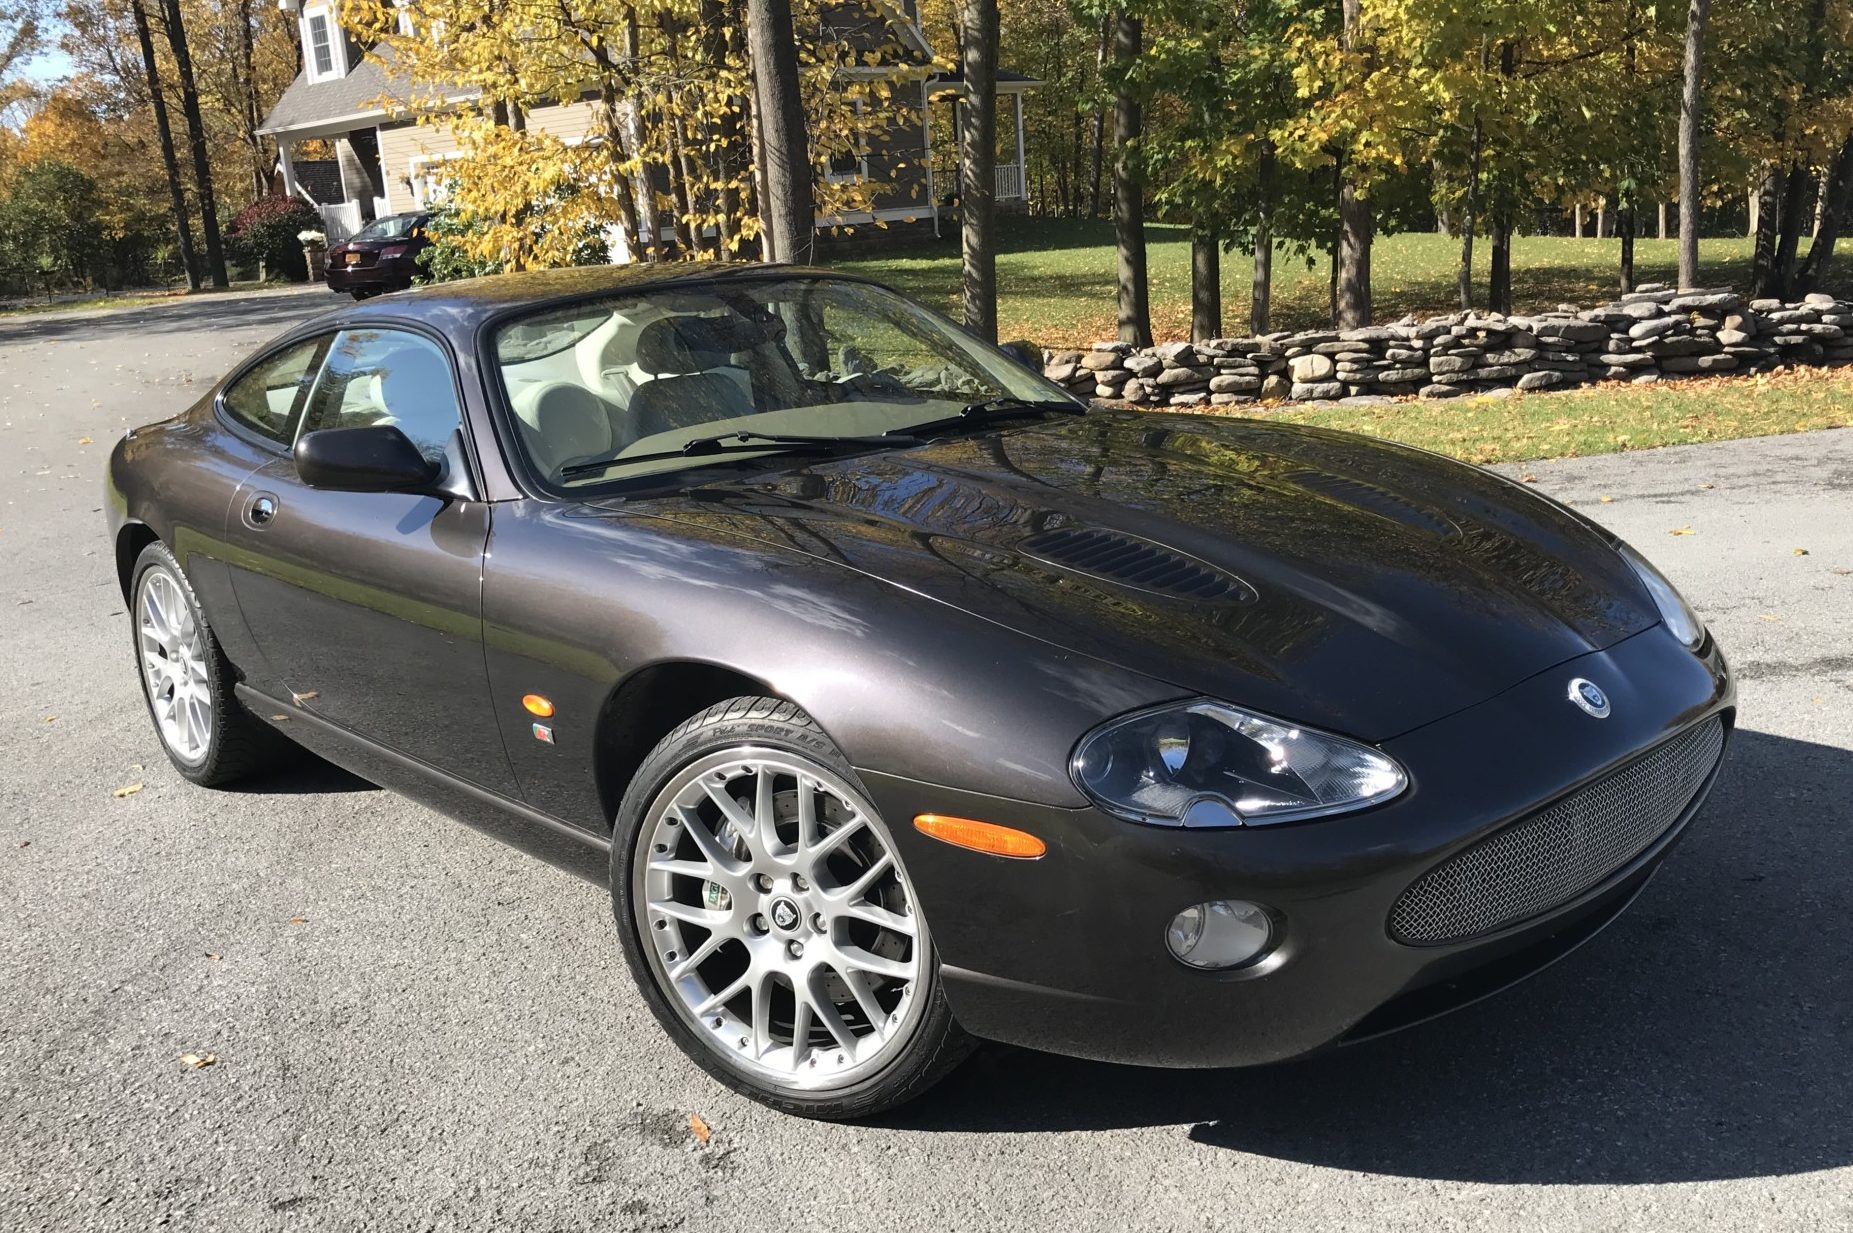 No Reserve: 2006 Jaguar XKR Coupe Victory Edition for sale on BaT Auctions  - sold for $16,100 on November 12, 2019 (Lot #25,049) | Bring a Trailer